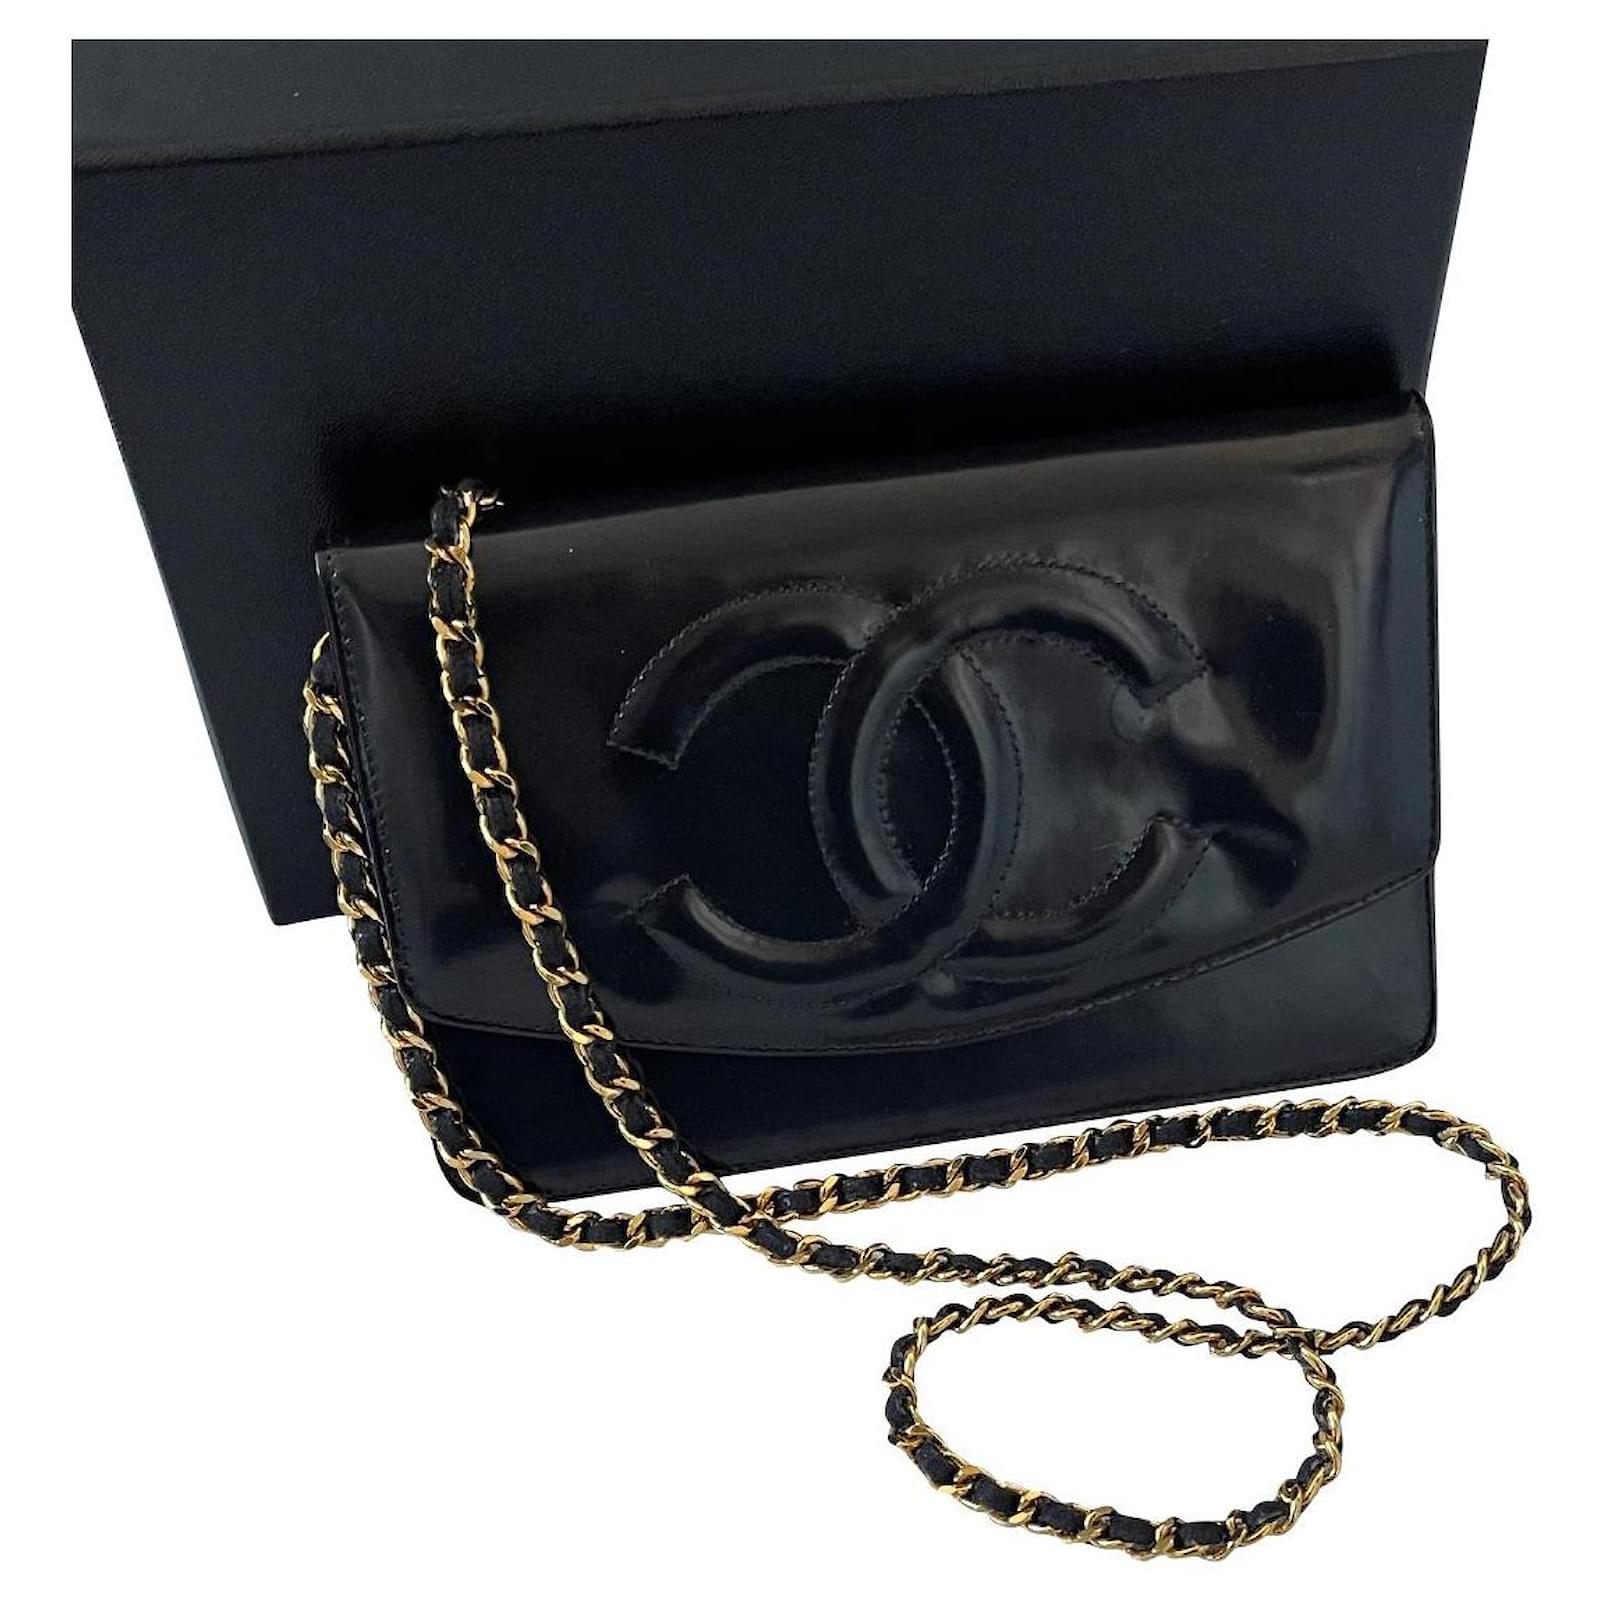 Chanel CC Woc Patent Leather Wallet on Chain